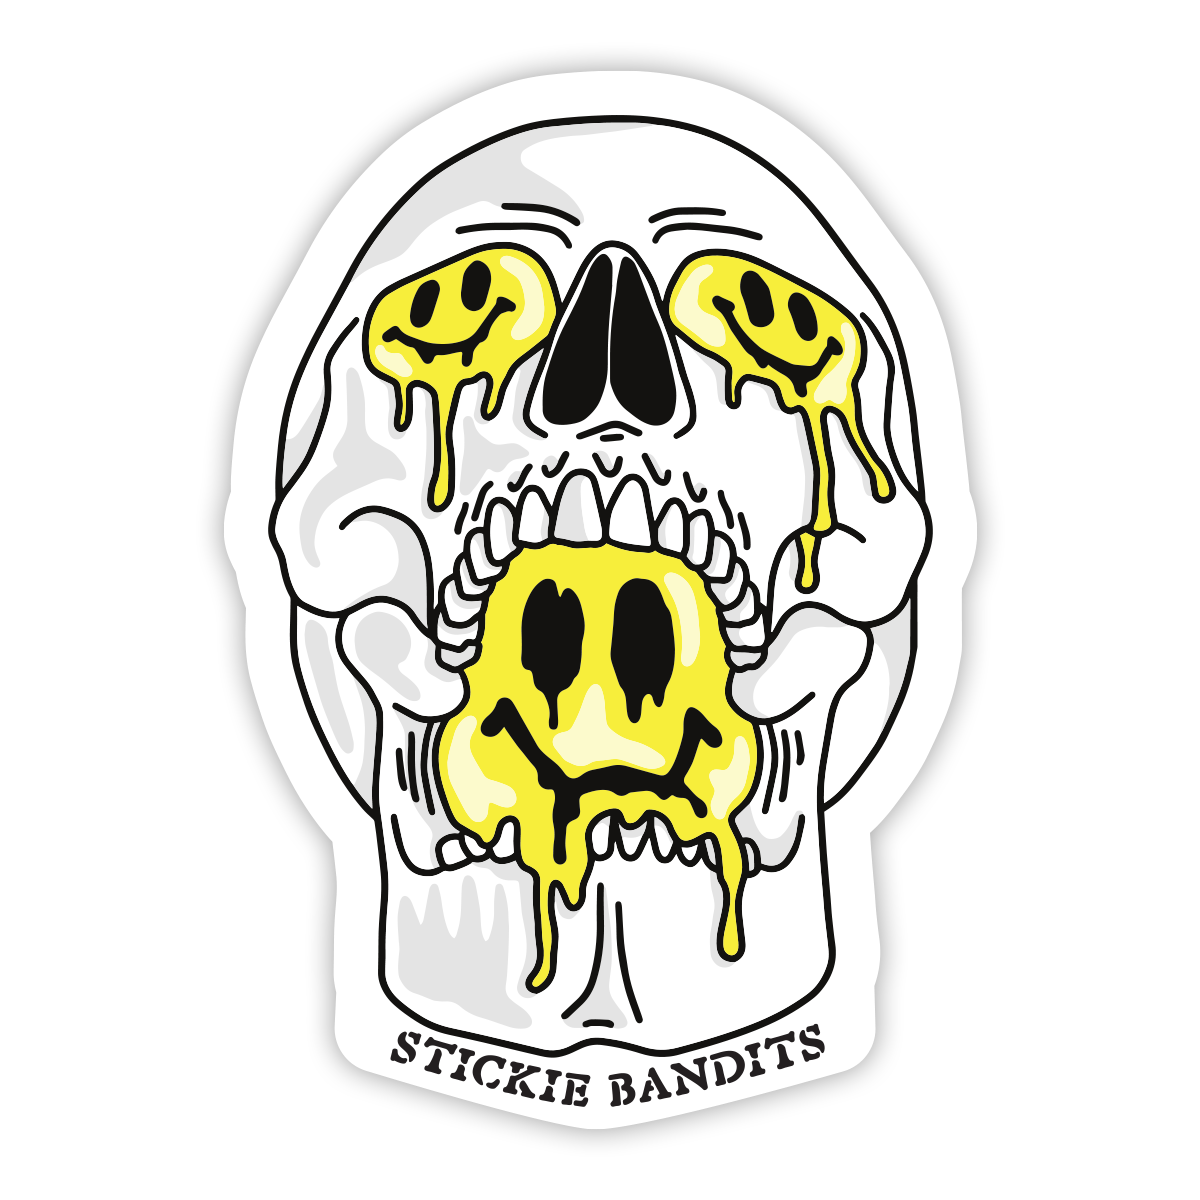 Melting Skull Smiley Face Waterproof Sticker Decal, Free Shipping, Laptop,  Car Sticker Decal